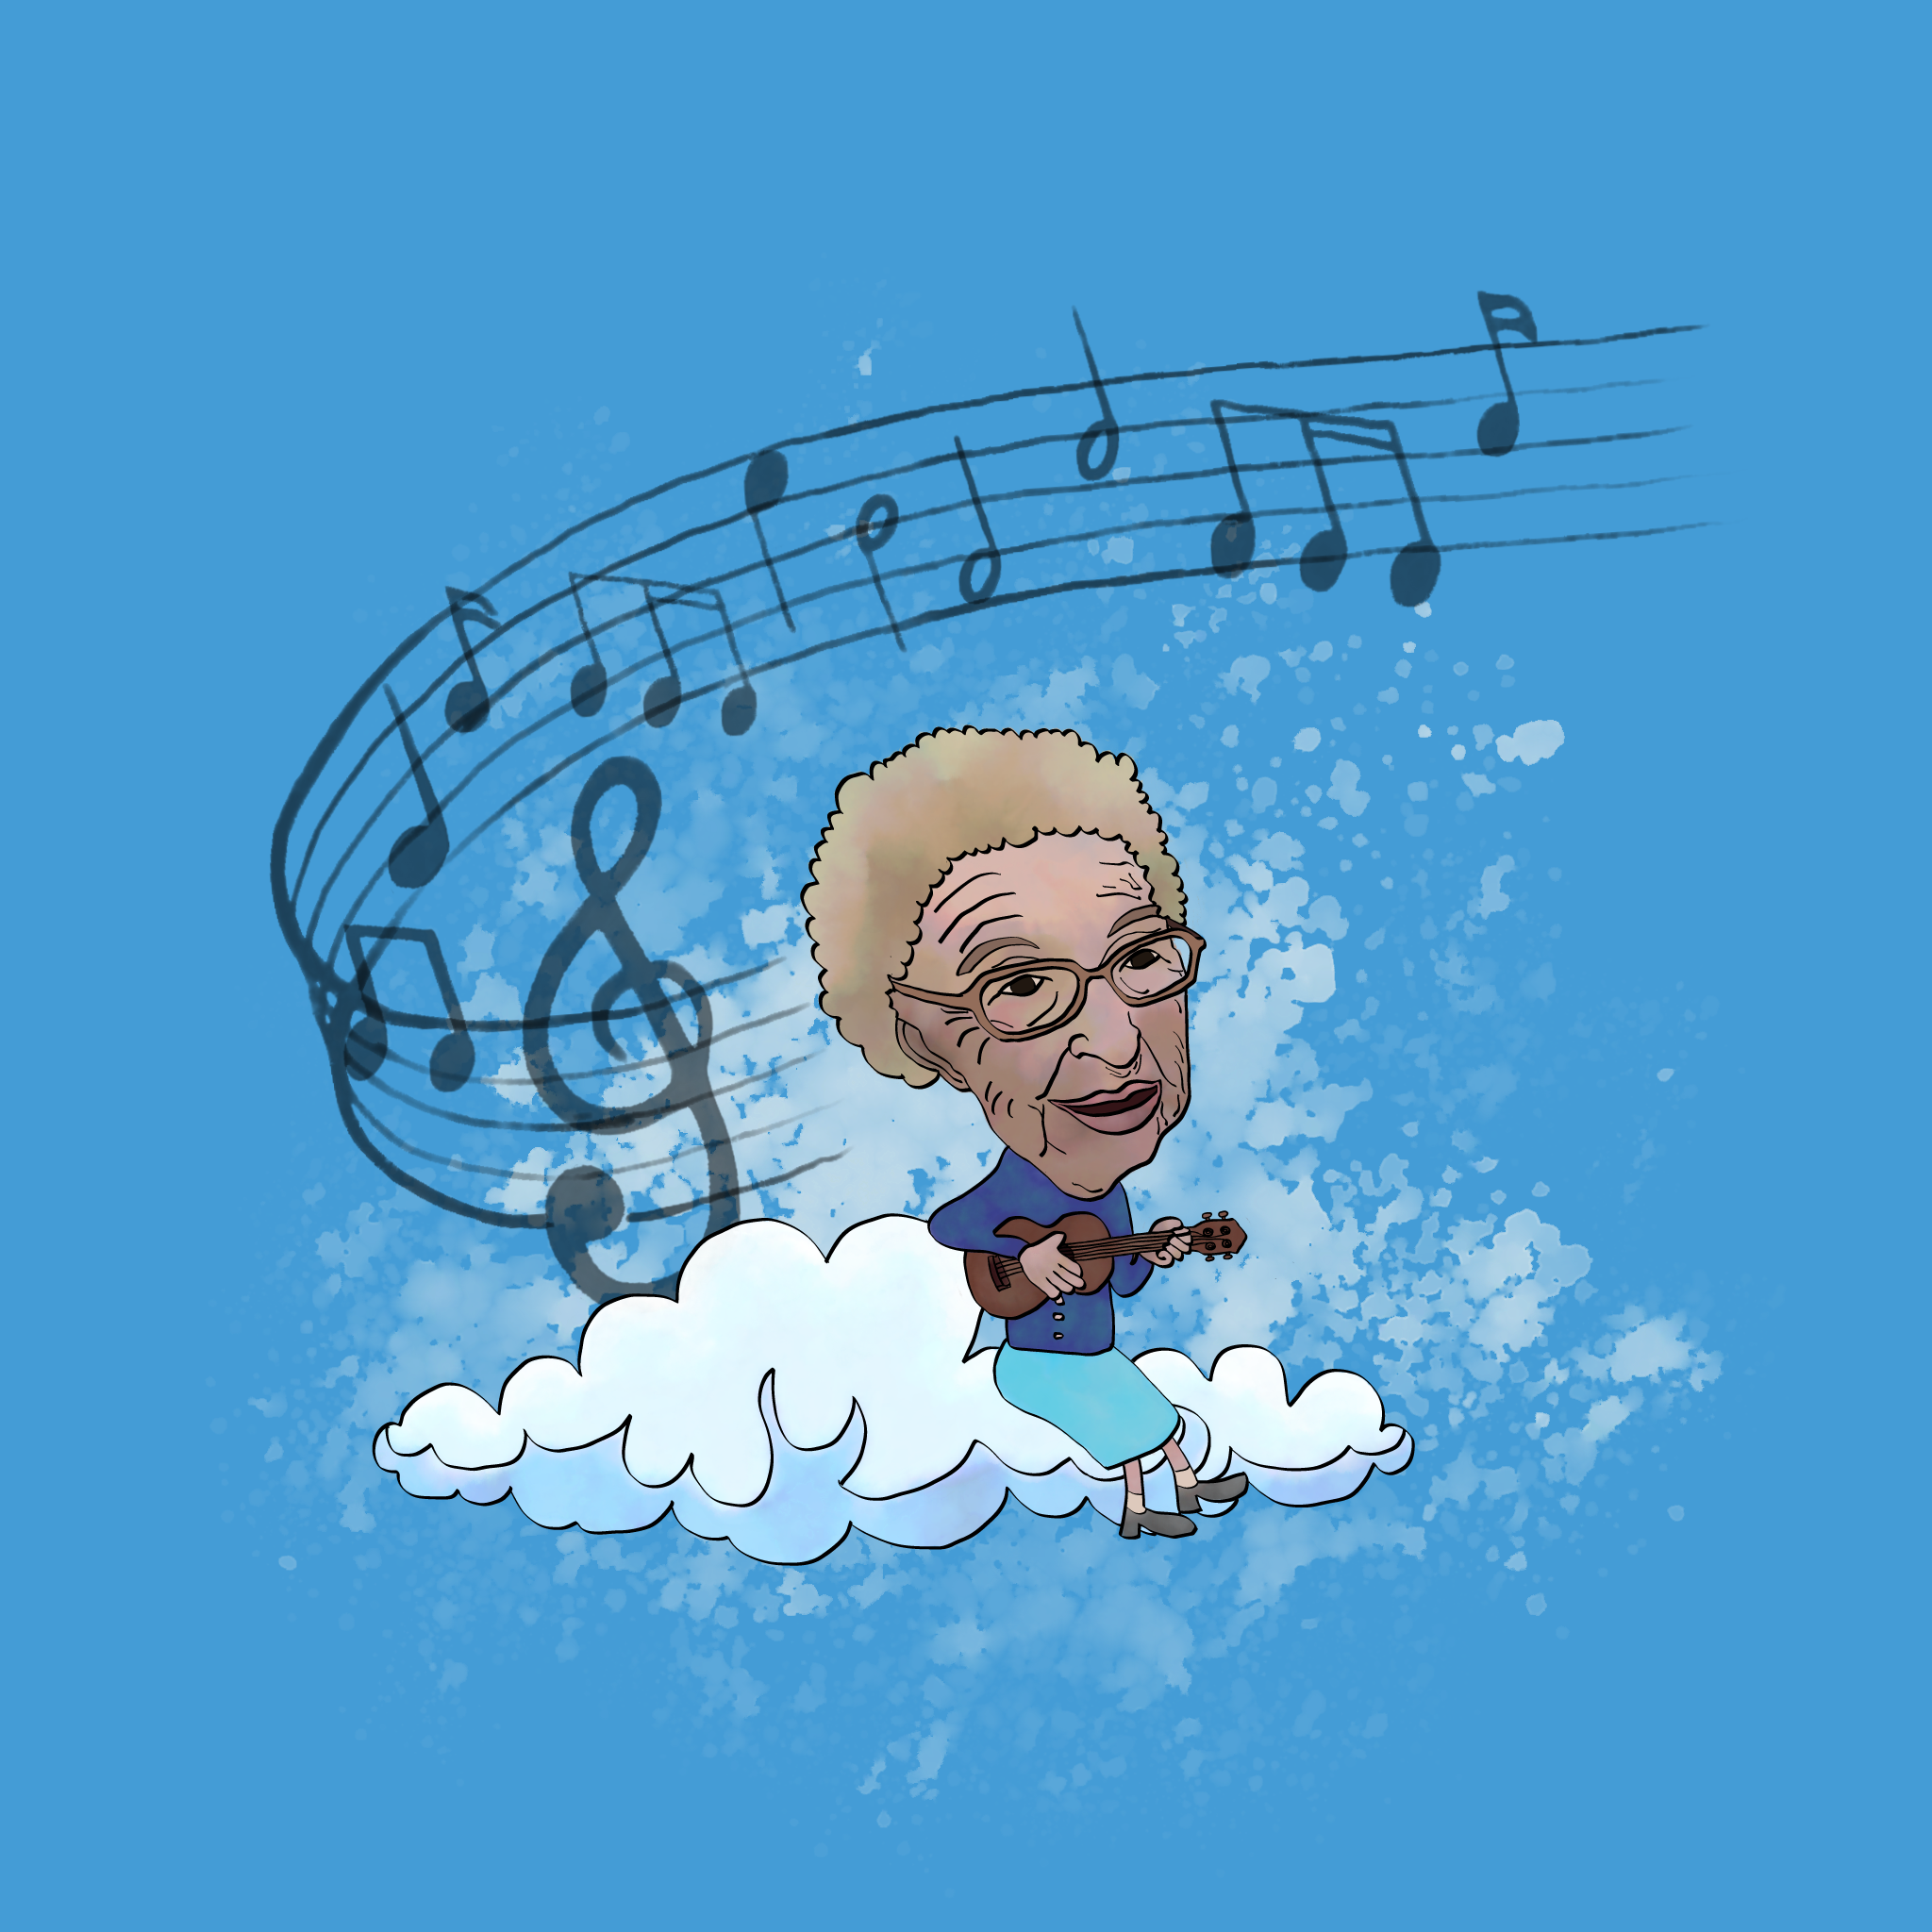 Digital illustration of old lady playing ukelele on top of a cloud